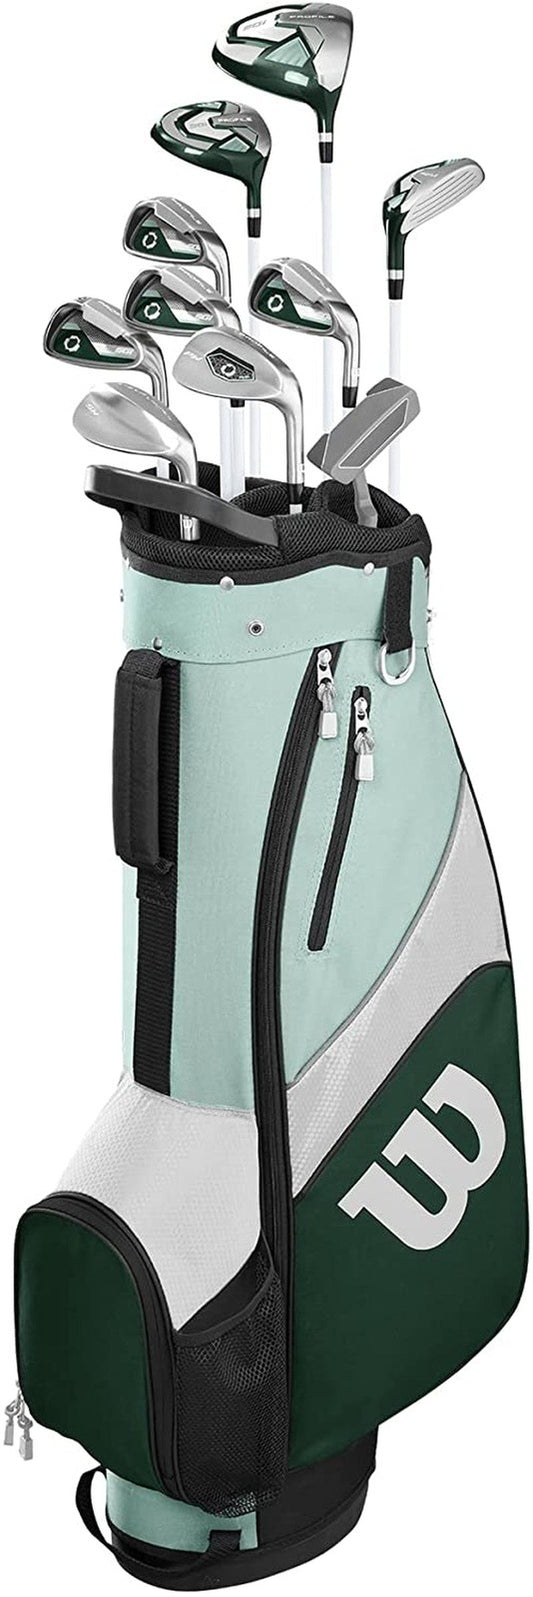 Women's Complete Golf Package Set